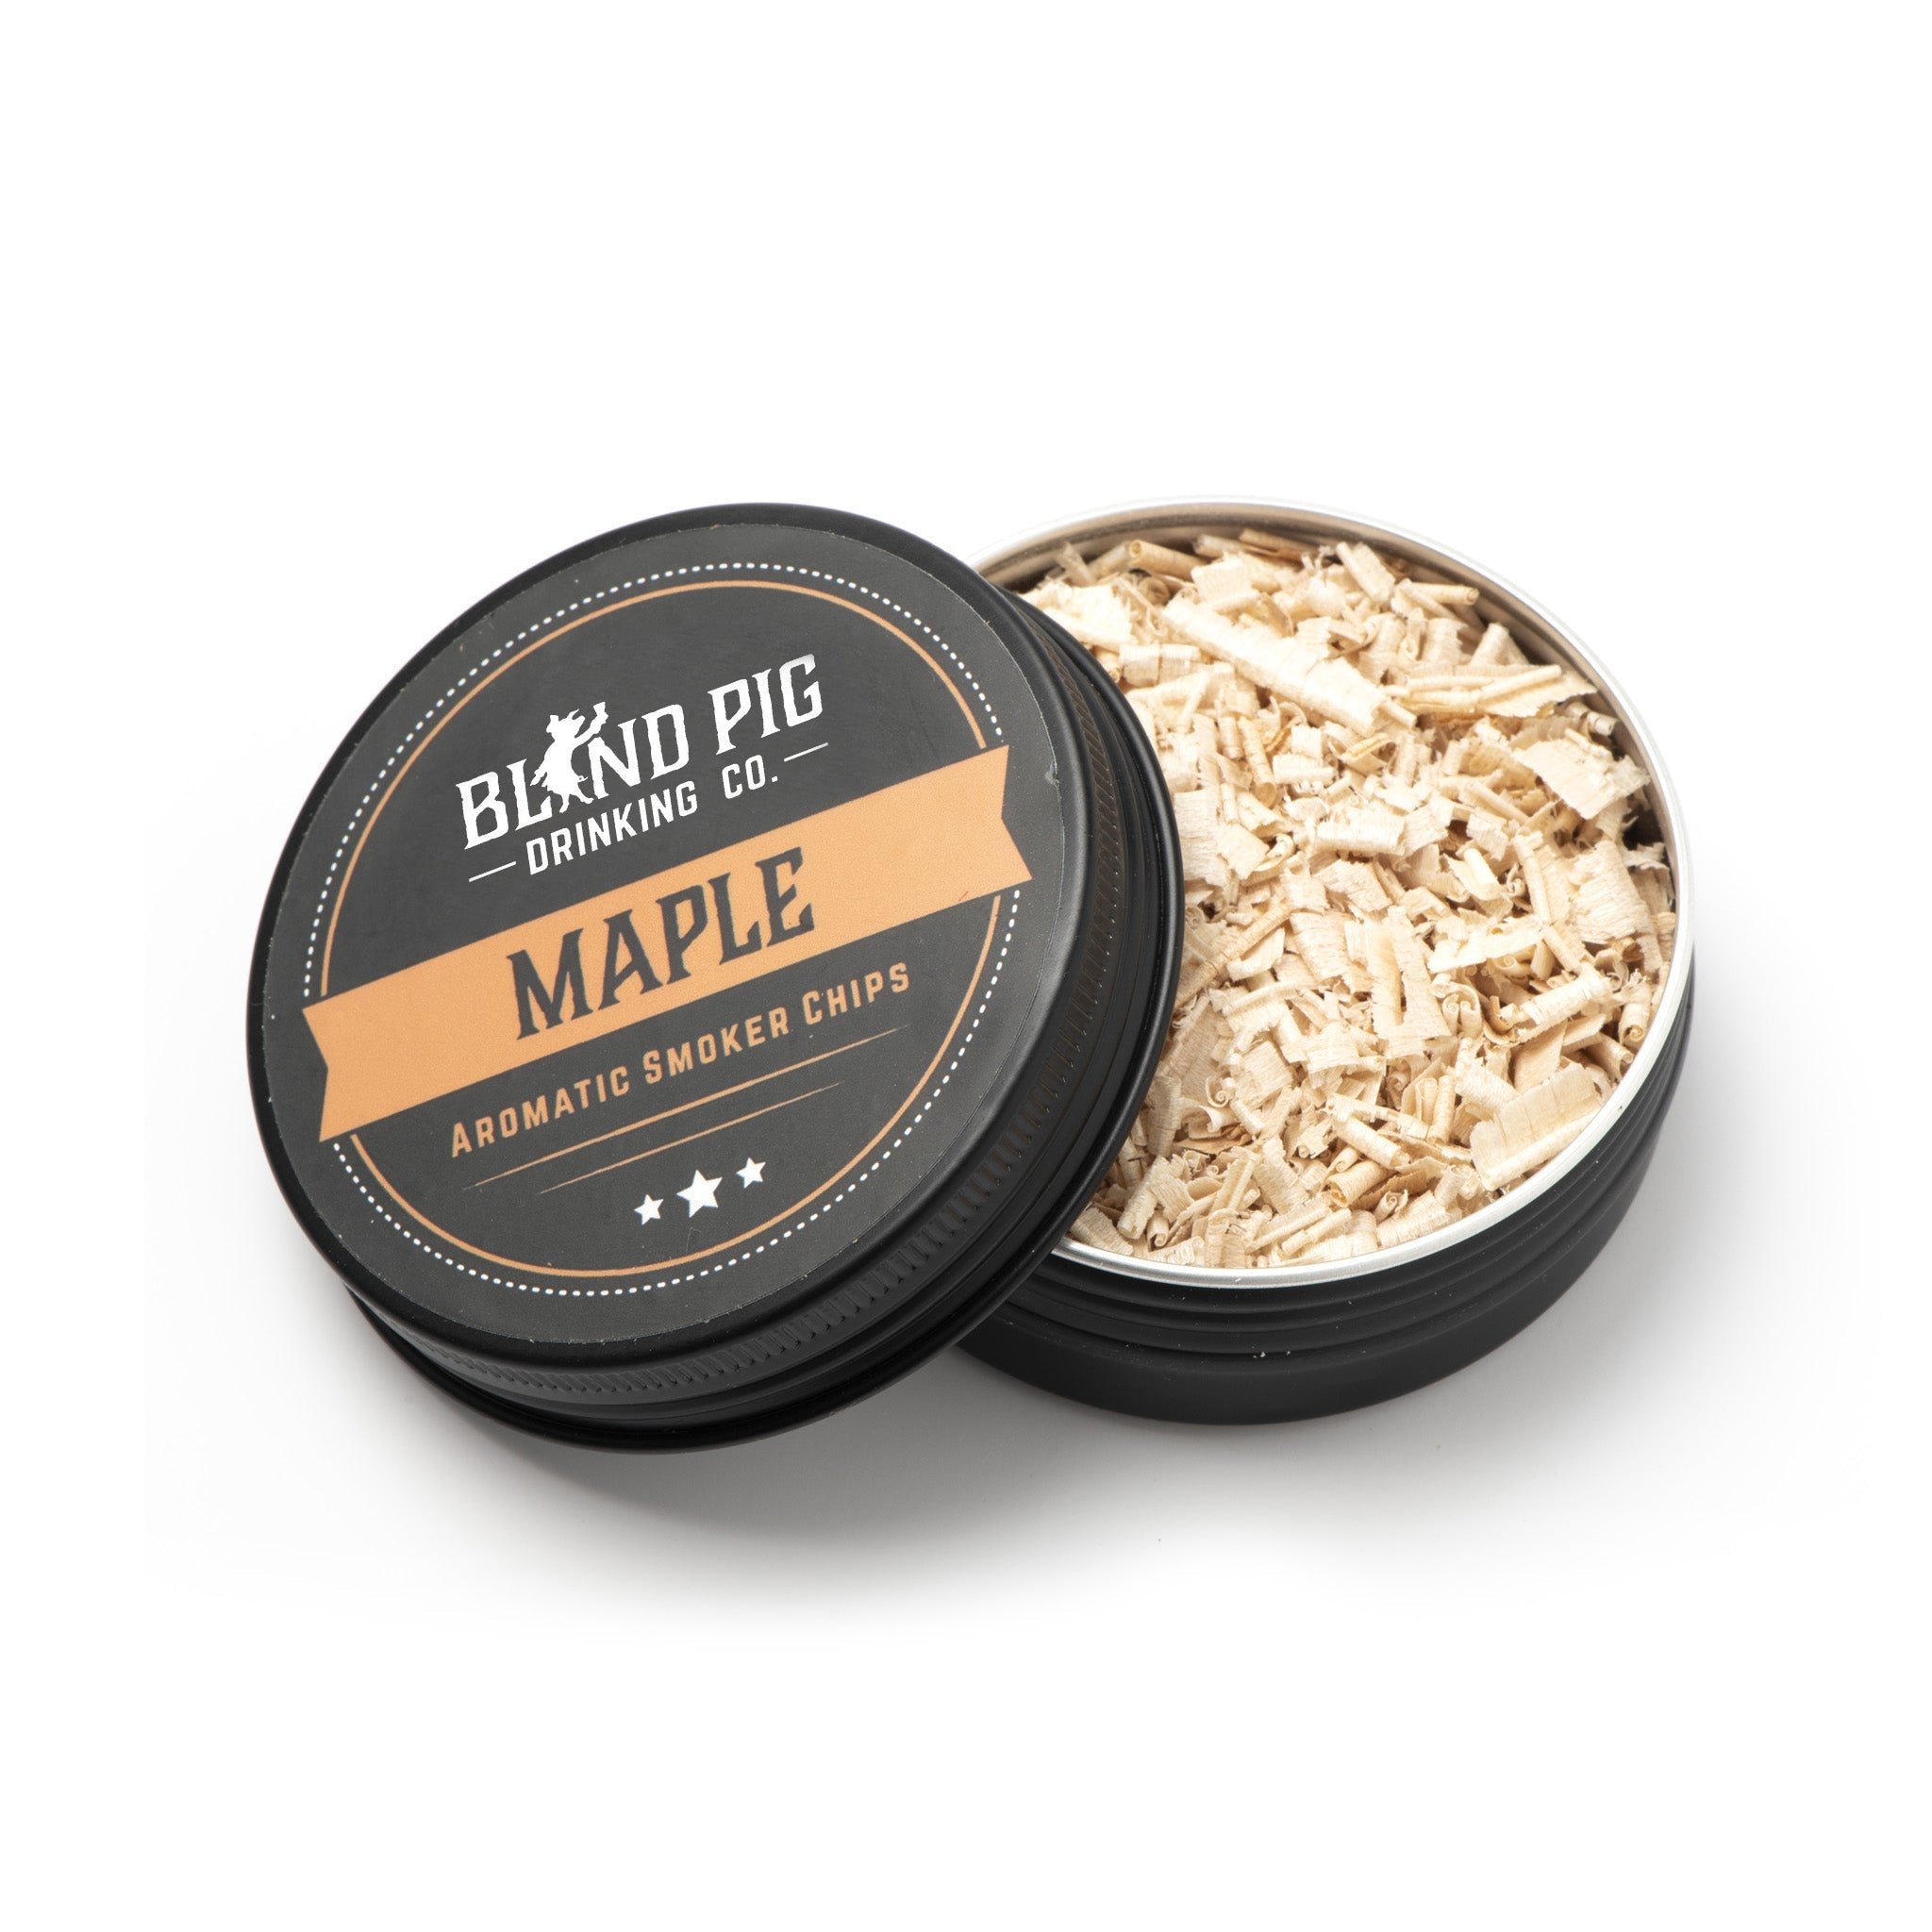 Maple Aromatic Smoker Chips - Blind Pig Drinking Co.